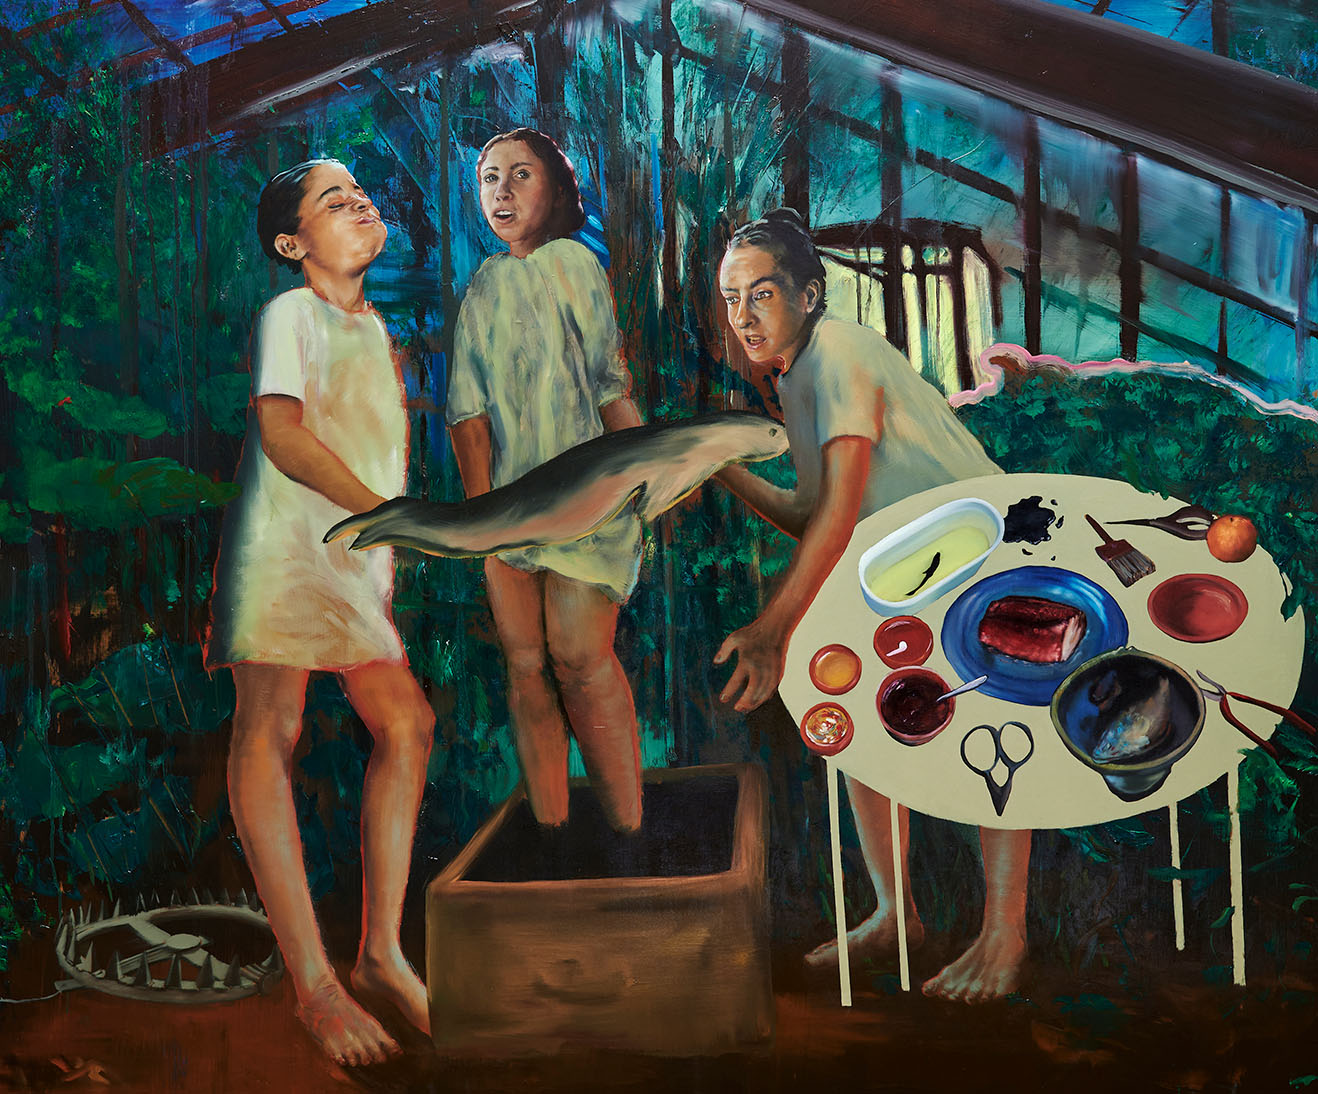 Theogony in the Greenhouse, oil on canvas, 100 x 120 cm